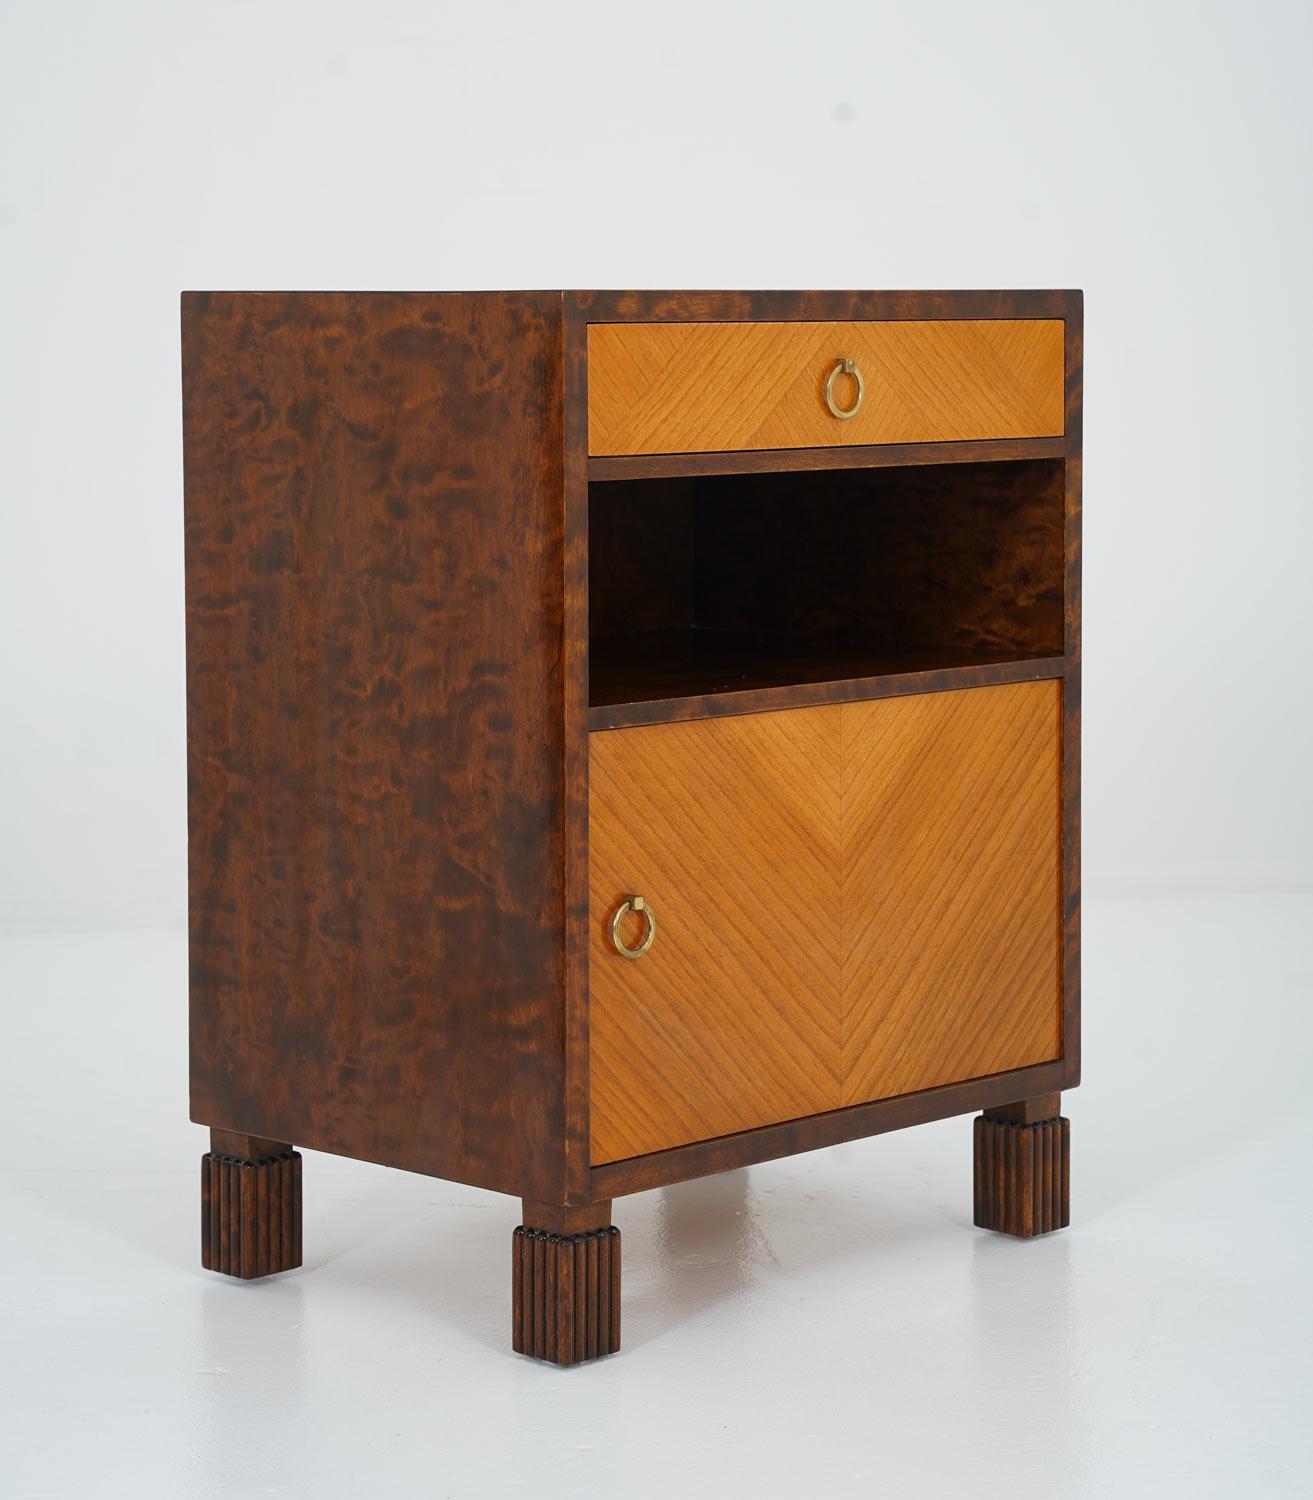 A pair of rare art deco bedside tables manufactured by Bodafors, Sweden, 1940s. 
The body of the tables is veneered in dark-stained birch, while the front is veneered with elm, with its grain creating a beautiful pattern. The round brass details